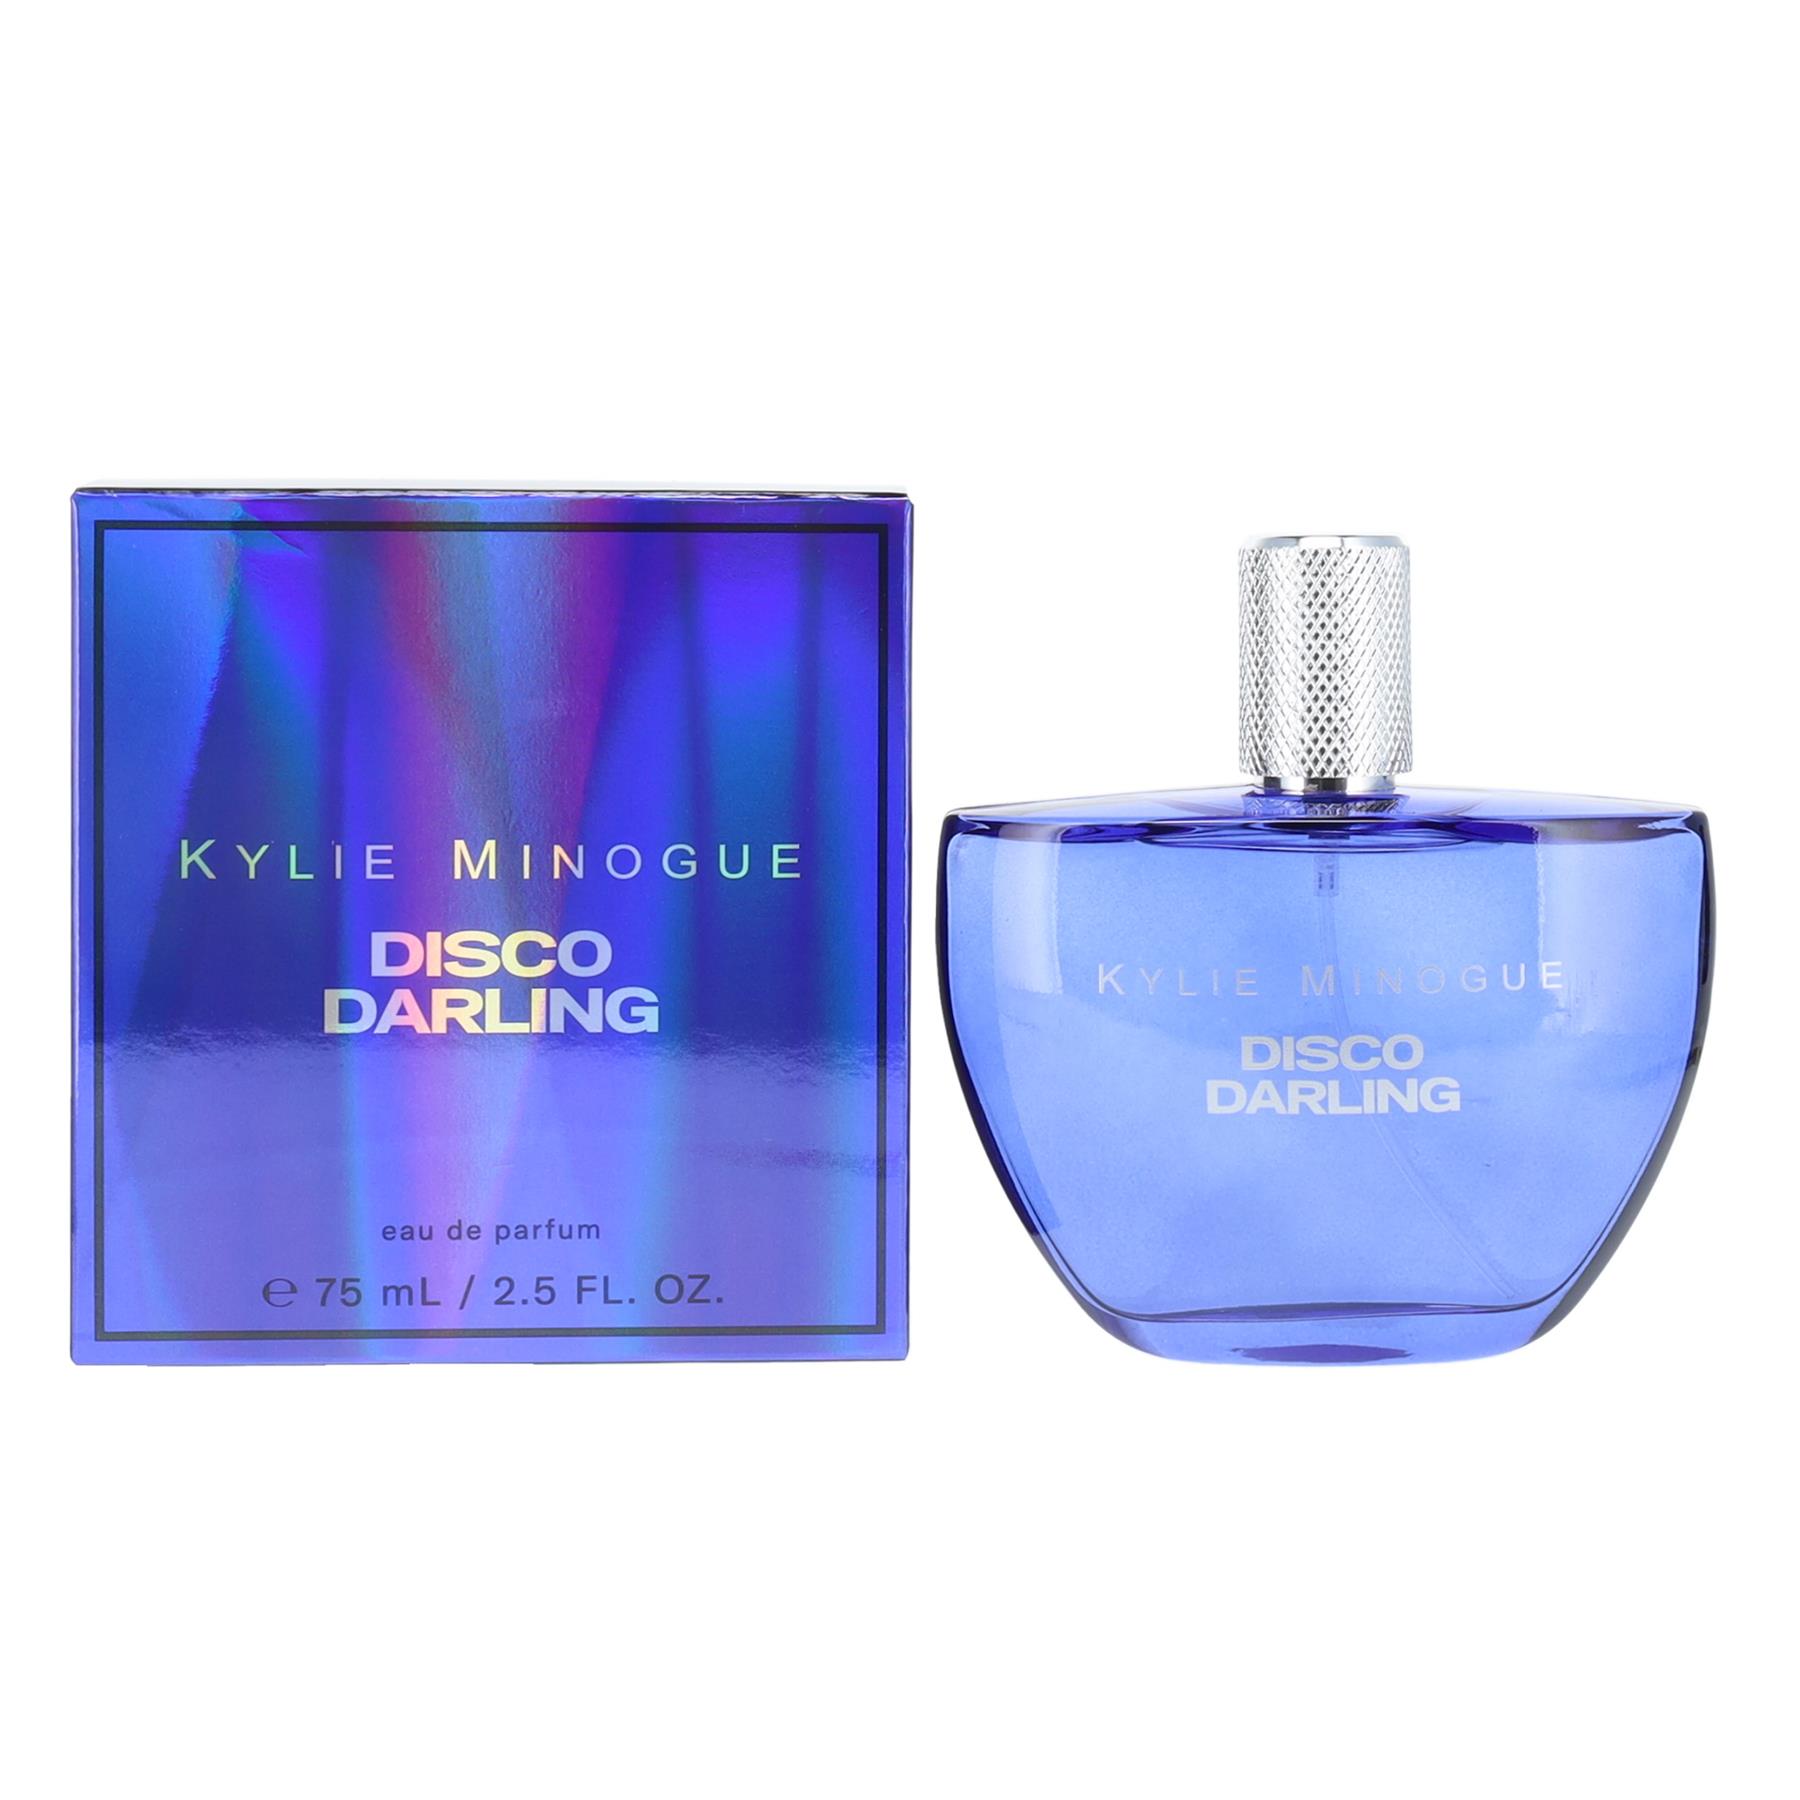 Kylie Minogue Disco Darling by Kylie 75ml Eau de Parfum Spray for Her from Perfume Plus Direct